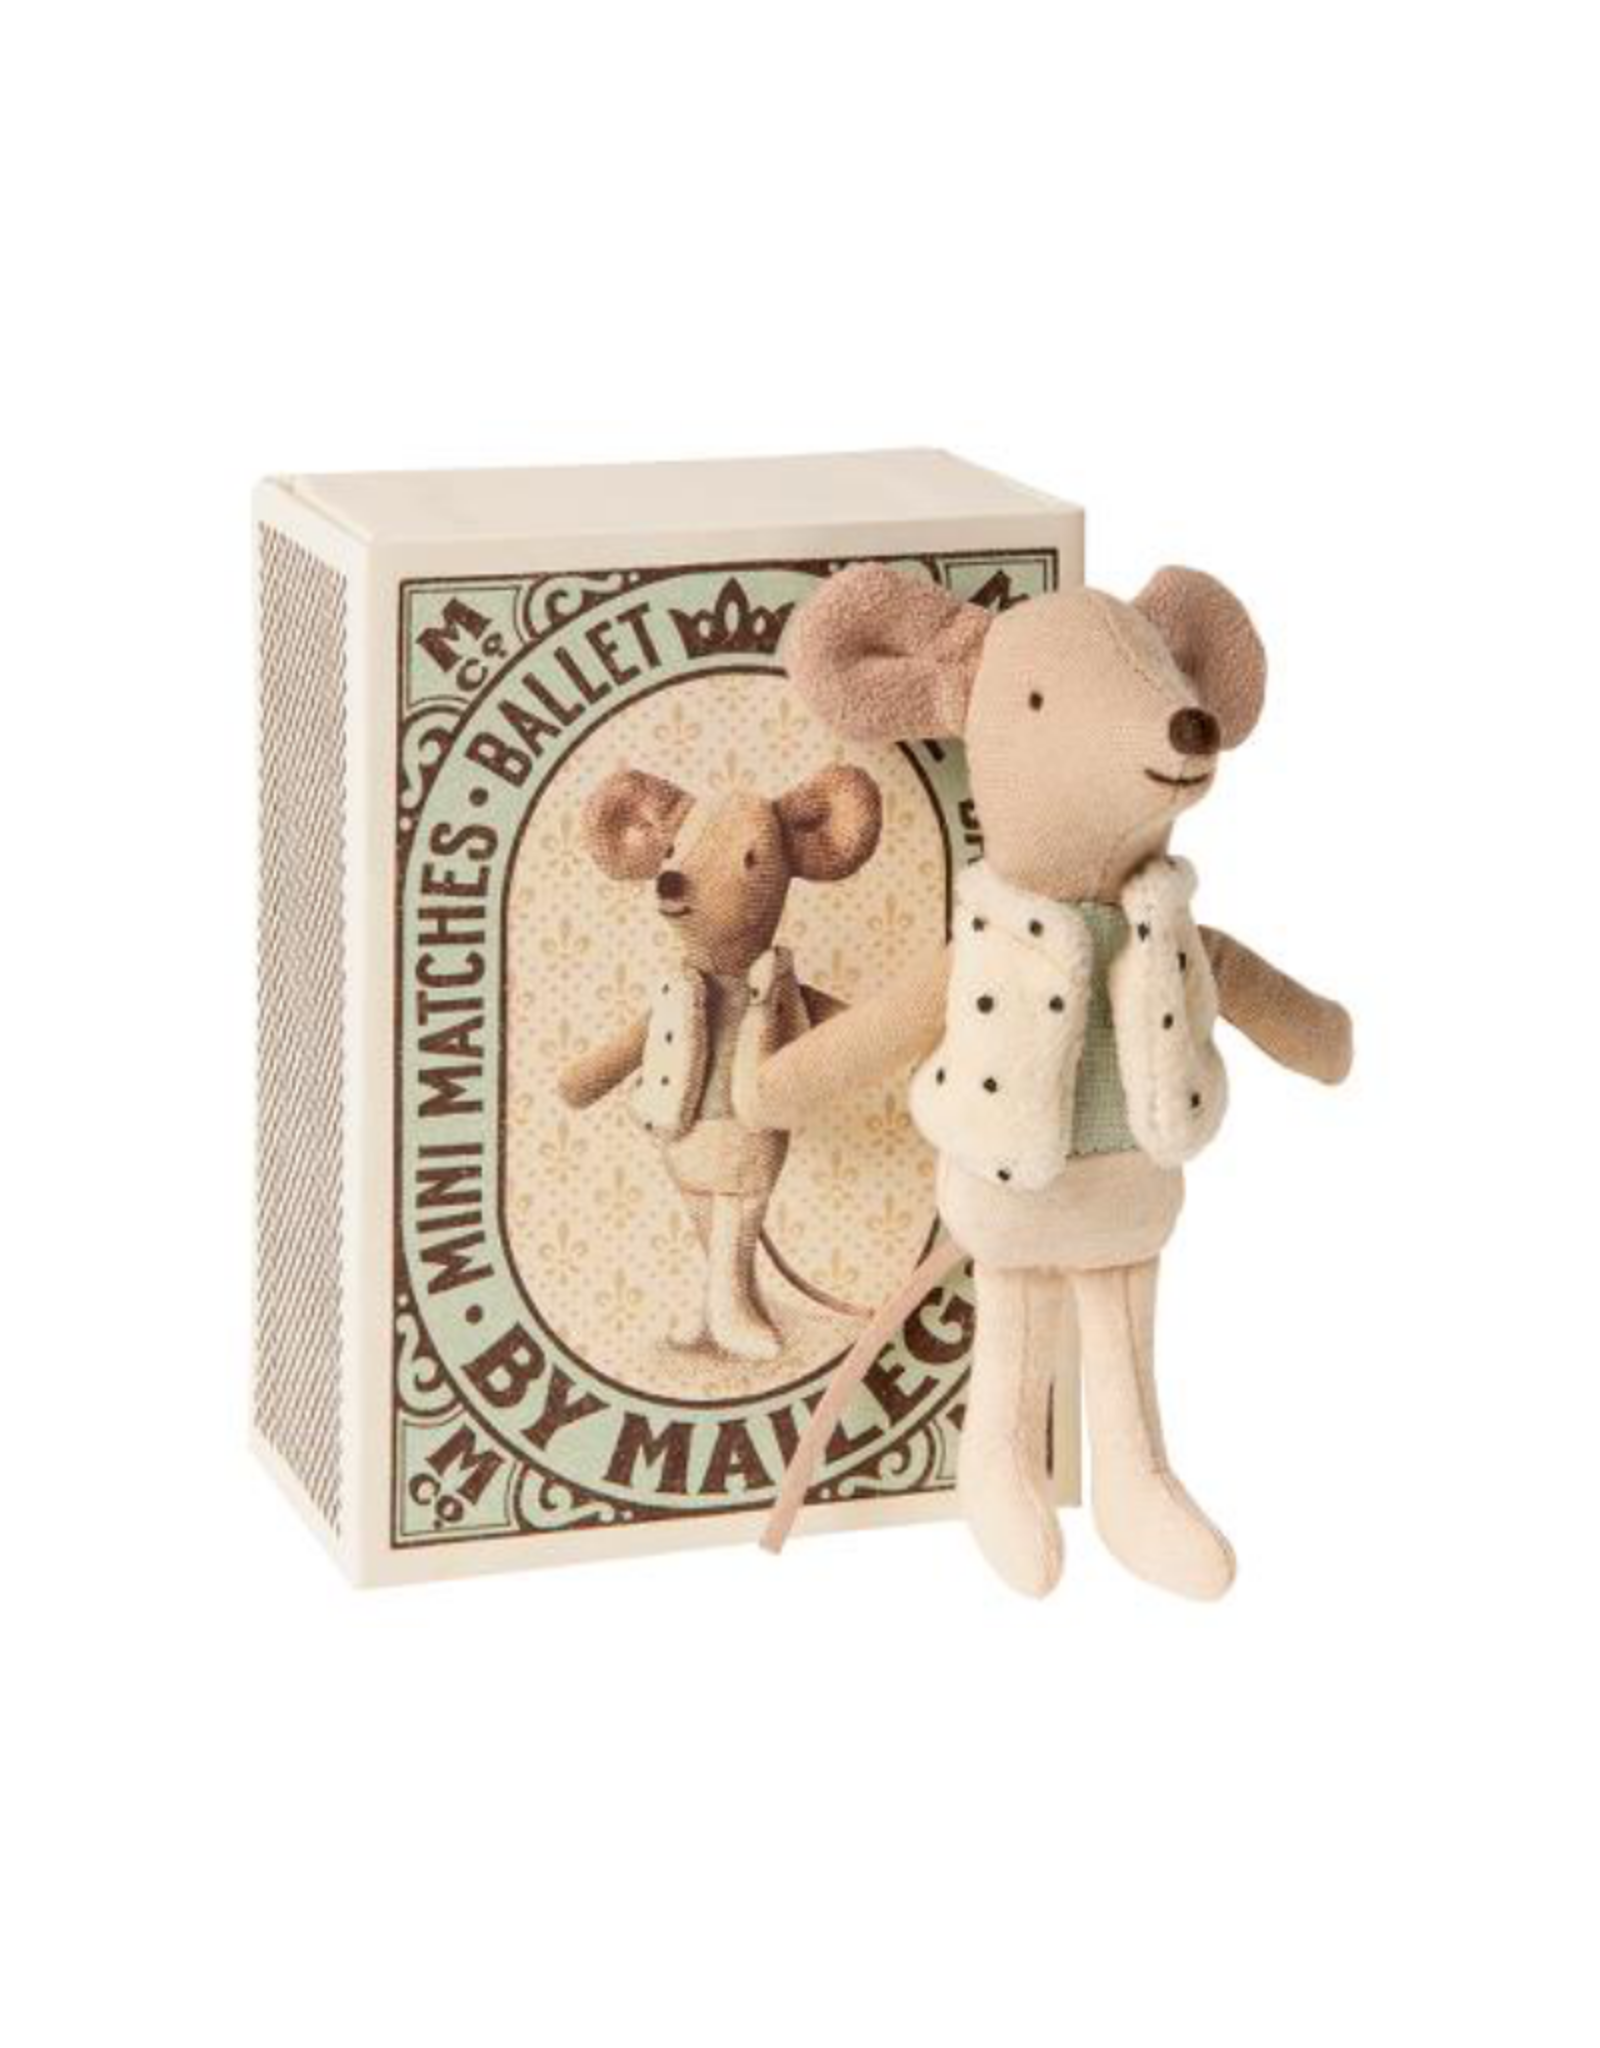 Dancer Mouse Little Brother in Matchbox